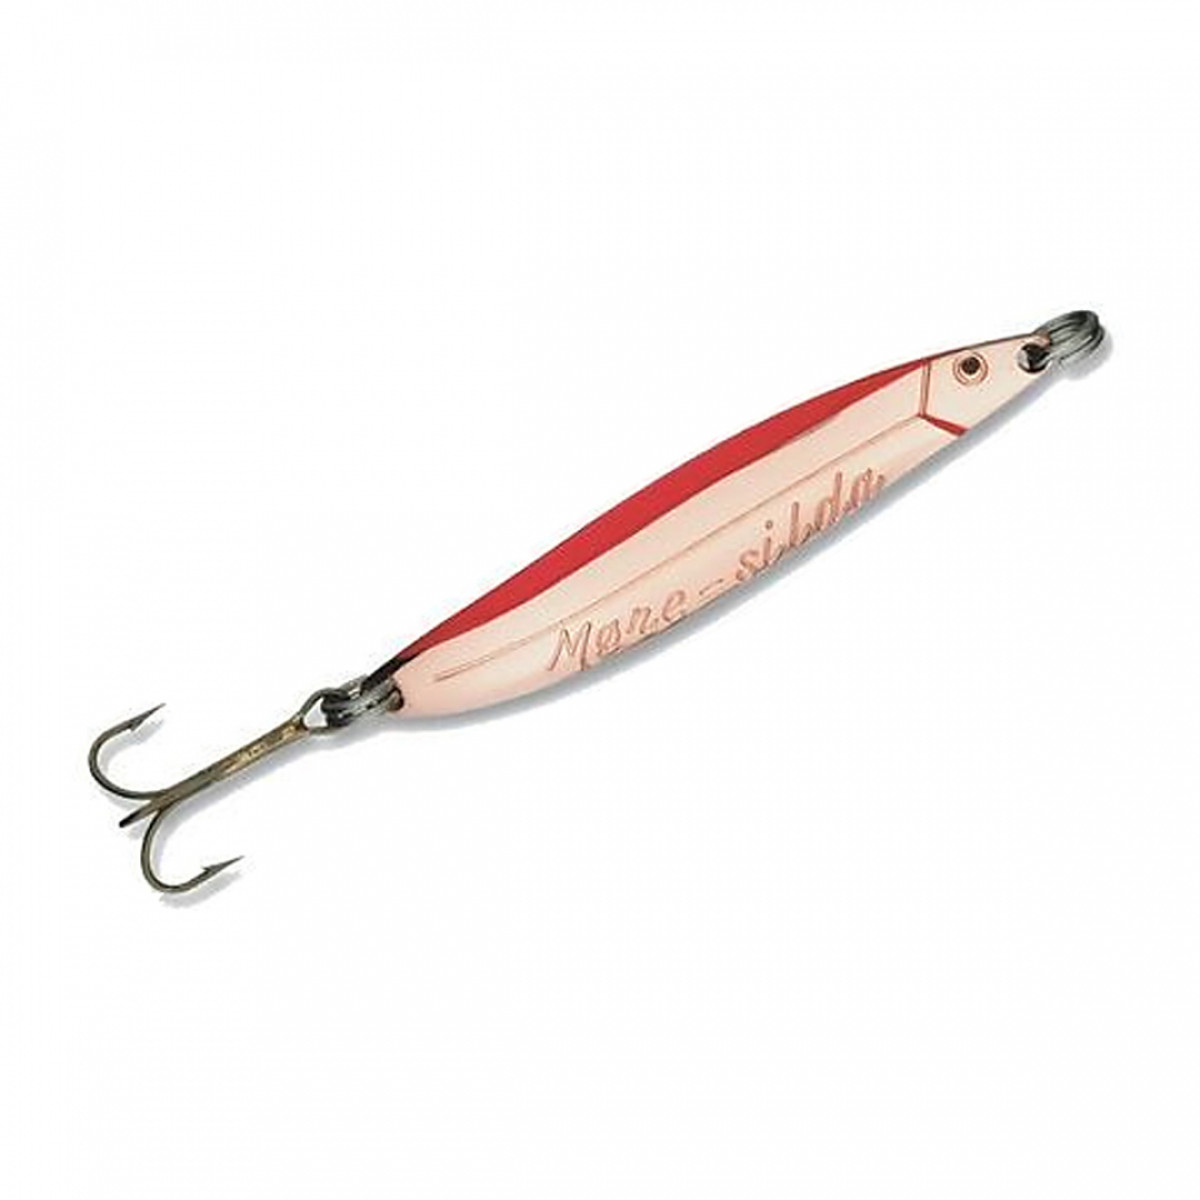 Buy Bluefox Moresilda Trout Lure 10g online at